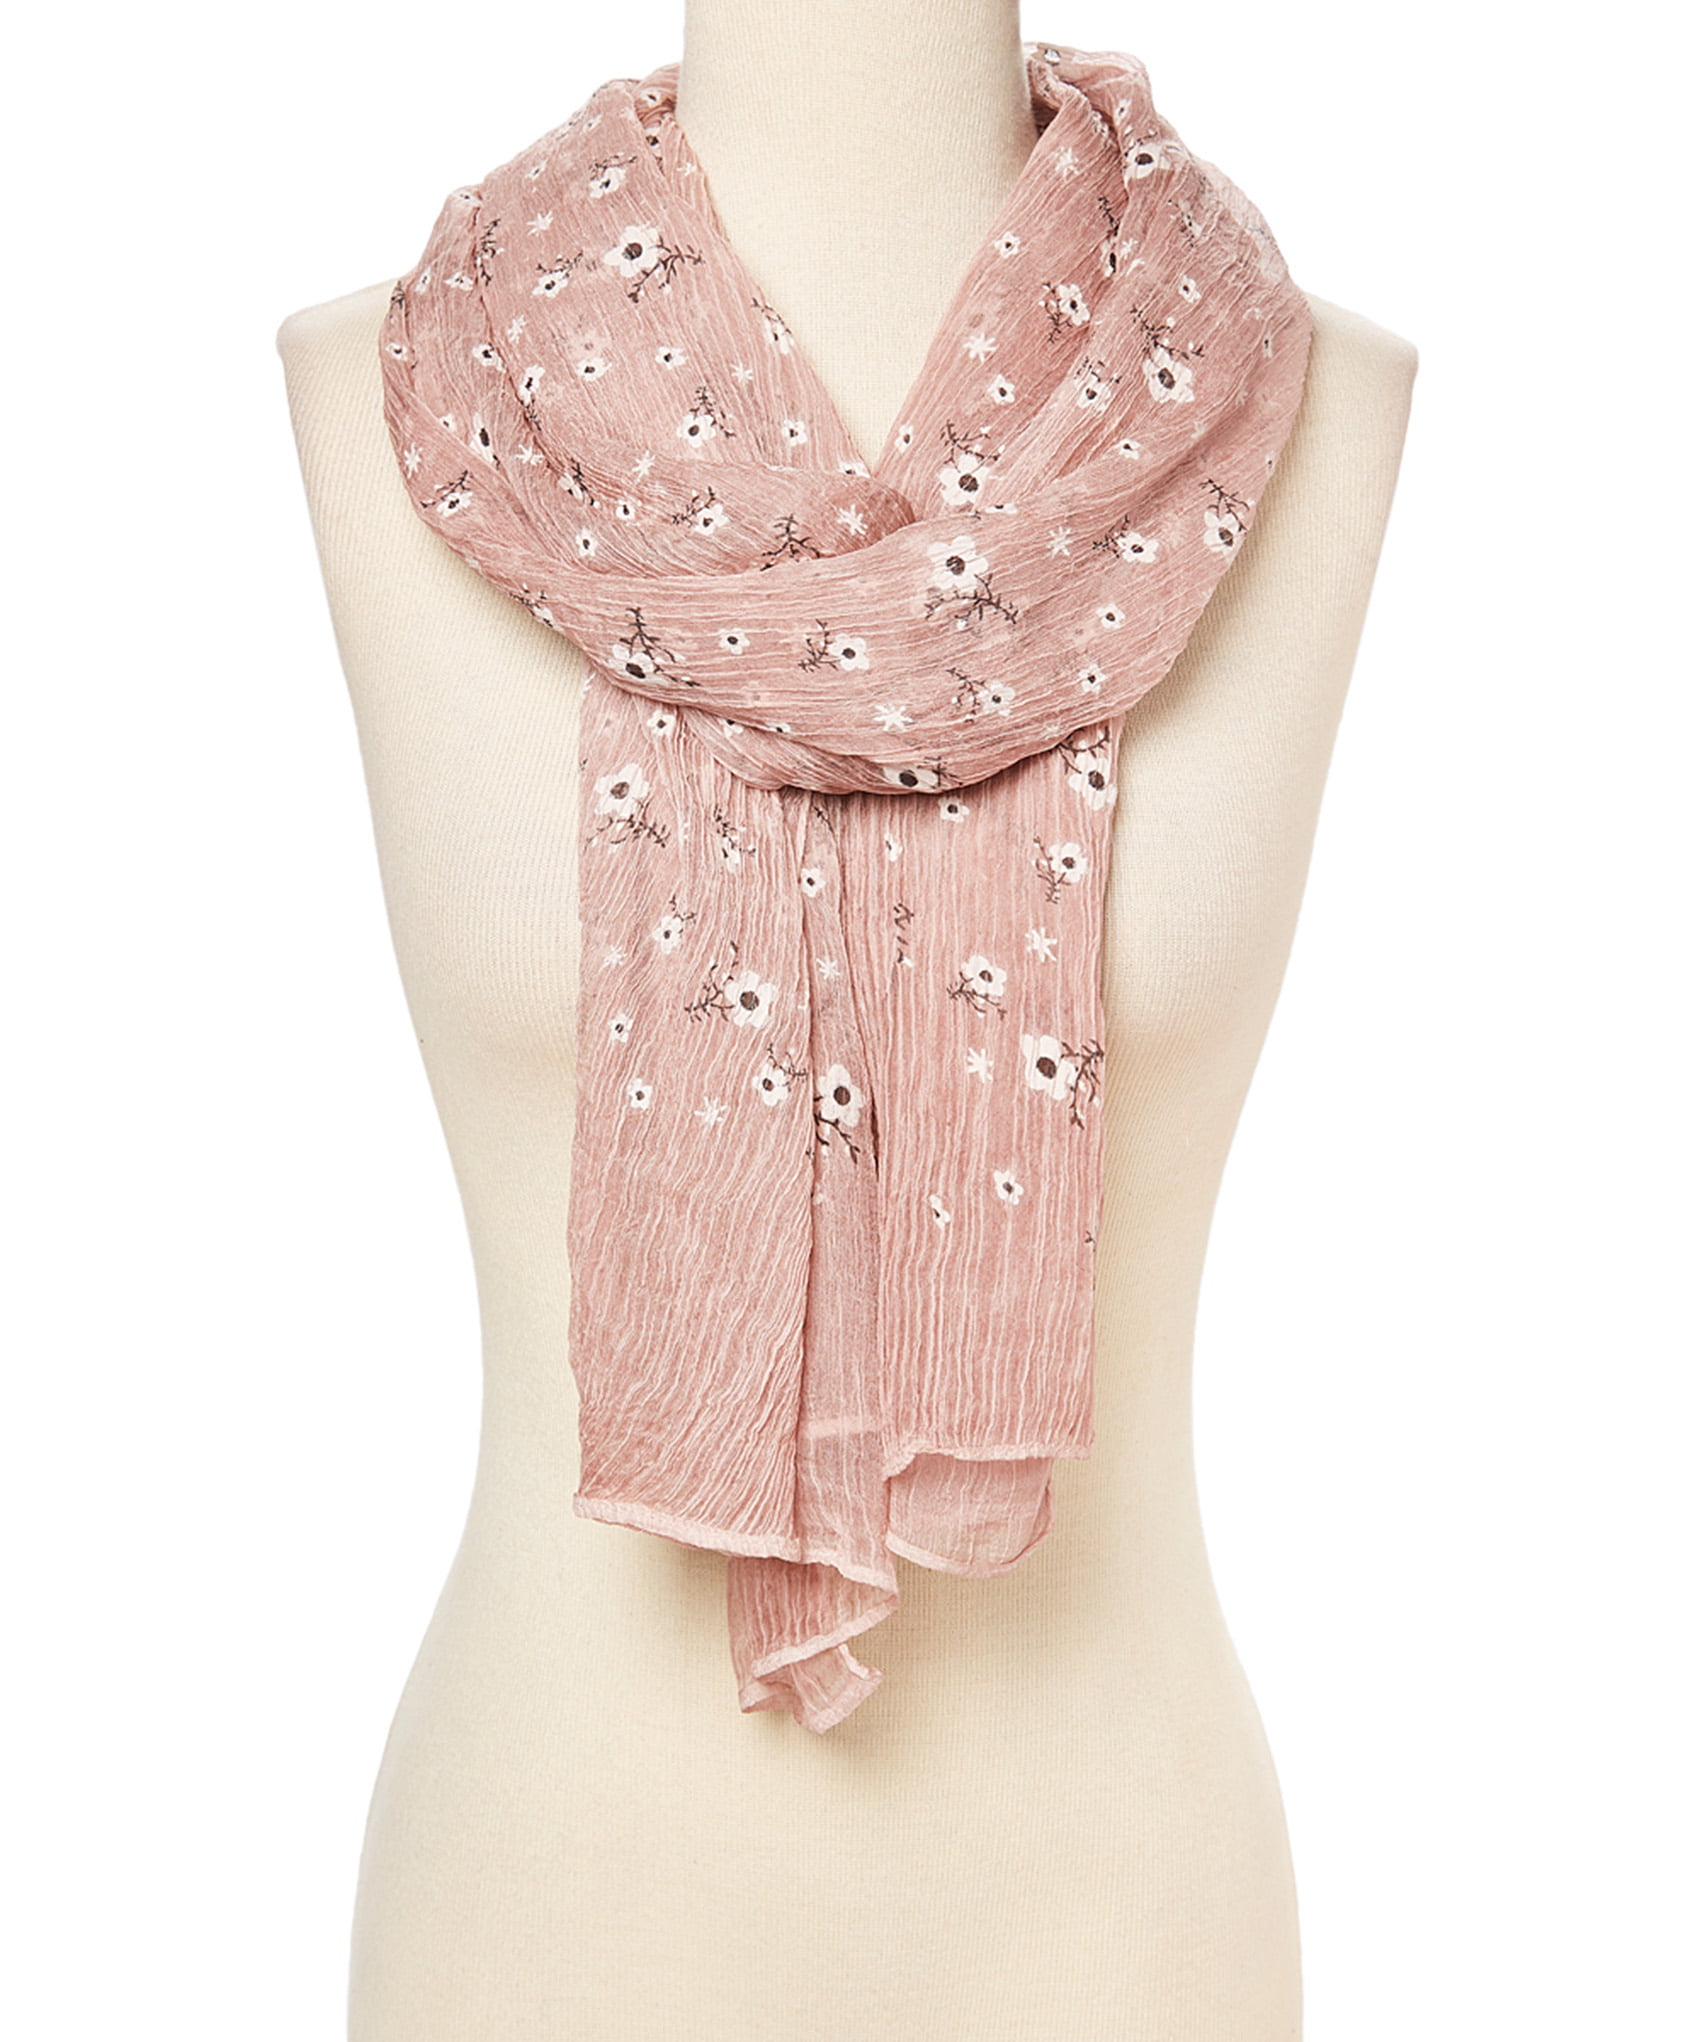 gift for her,Spring,Summer,Fall Accessories Brown pink flower retro pattern vintage fabric neck and head wrap shawl